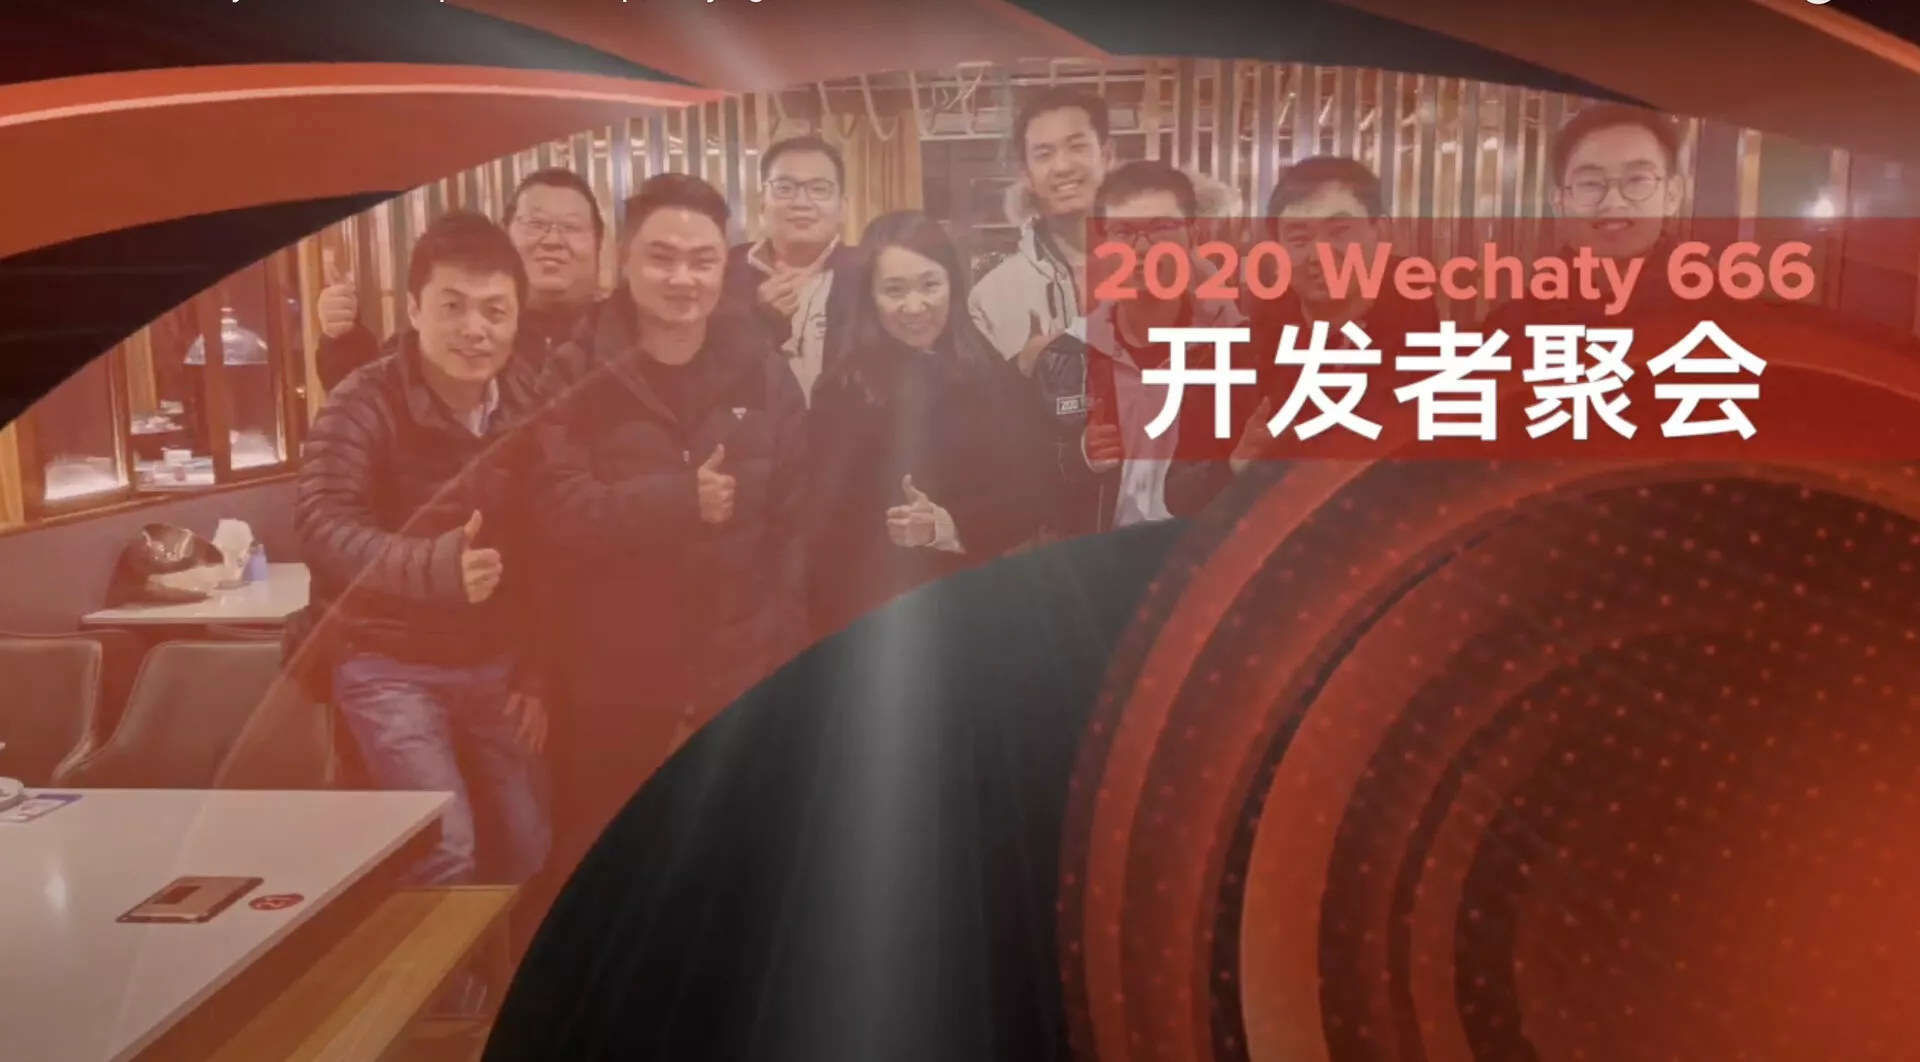 2020 Wechaty 666: 6 lines of code, 6 platforms, and 6 languages